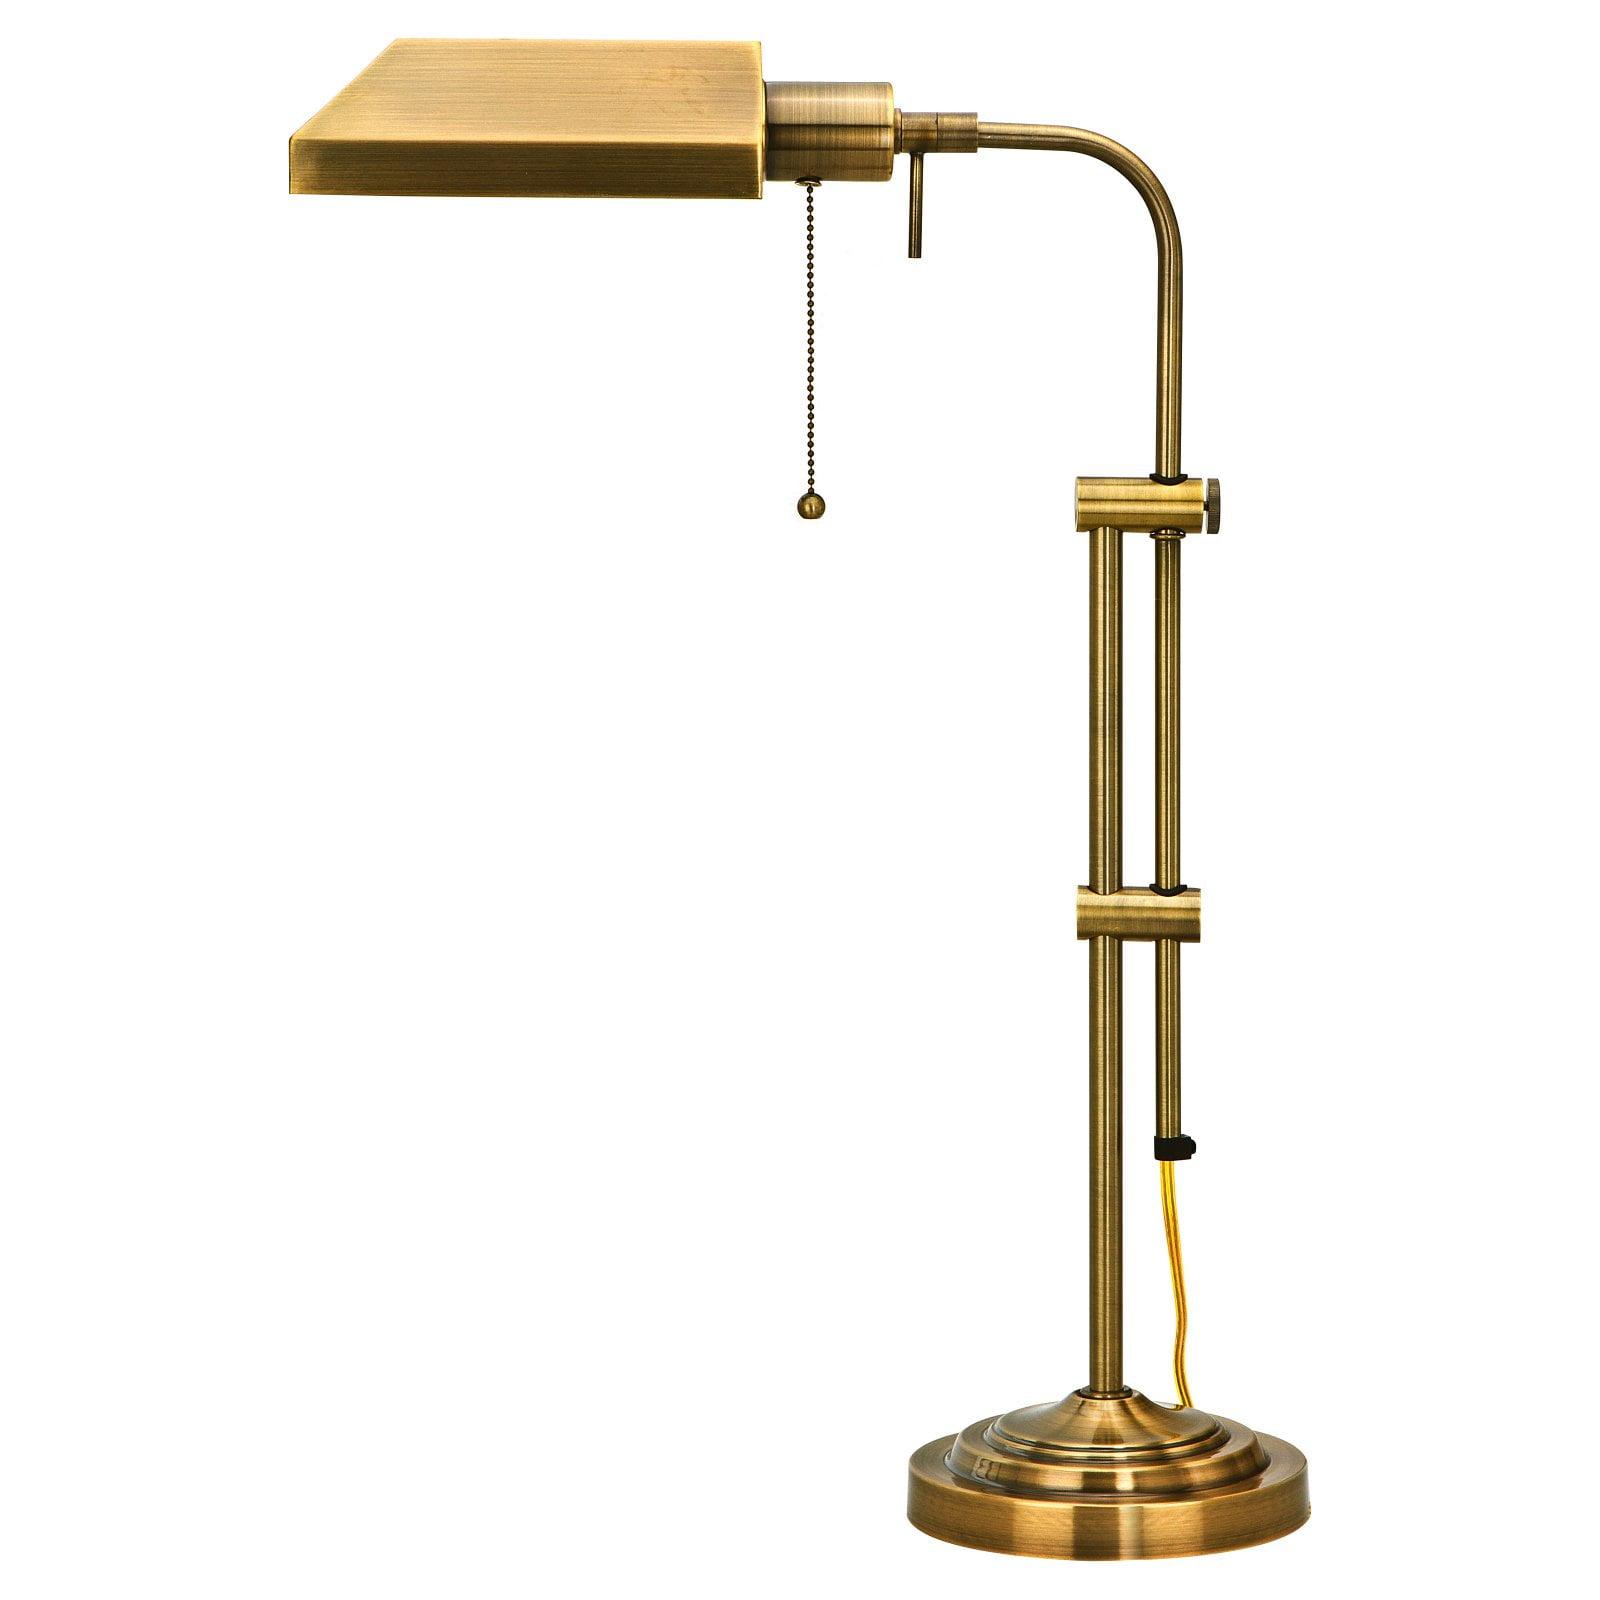 Adjustable Antique Brass Pharmacy Desk Lamp with 3-Way Switch